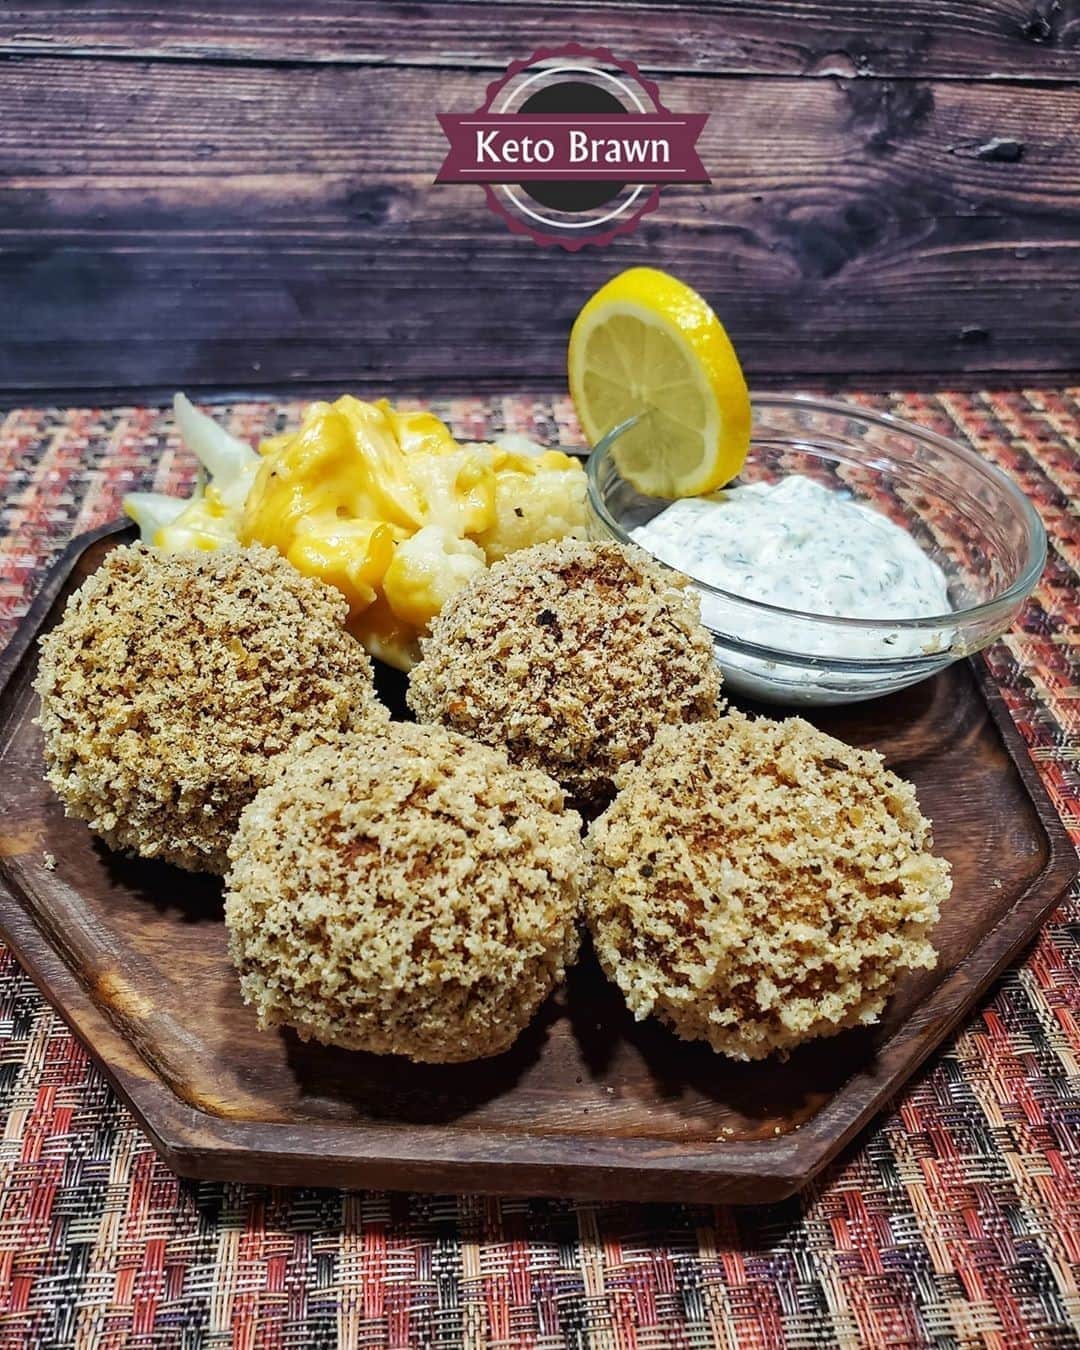 Flavorgod Seasoningsさんのインスタグラム写真 - (Flavorgod SeasoningsInstagram)「Salmon Balls by @ketobrawn these look amazing!! They used Flavor God Garlic Lovers Seasoning to make these!⁠ -⠀⁠ Add delicious flavors to your meals!⬇️⁠ Click link in the bio -> @flavorgod  www.flavorgod.com⁠ -⁠ Our salmon patties all rolled up into a dippable appetizer 😁😋😁⠀⁠ -⁠ 4 3oz packets of starkist salmon⠀⁠ 1 egg⠀⁠ 1/4 cup @porkkinggood Italian crumbs ( keto panko 😁😁 )⠀⁠ 1 tbsp @flavorgod Lemon Garlic seasoning ⠀⁠ Cooking oil of choice to deep fry with. We used lard⠀⁠ ⠀⁠ The Tartar Sauce ⠀⁠ ⠀⁠ 1 cup mayo⠀⁠ 1/4 cup dill relish ⠀⁠ 1 tbsp dried or minced dill⠀⁠ 1 tsp lemon juice⠀⁠ 1 tsp onion powder⠀⁠ Ground black pepper to taste ⠀⁠ 1/2 tsp @flavorgod Garlic Lovers ⠀⁠ ⠀⁠ Mix all ingredients , we transferred to a med mason jar and let sit in the fridge for an hour or so. ⠀⁠ ⠀⁠ 1) Empty the salmon packets into a small bowl. If there's any liquid just dump it out. Add the egg, Lemon Garlic Seasoning, panko crumbs and mix well with your hands. ⠀⁠ 2) Make ping pong ball sized balls and set on a plate.⠀⁠ 3) Roll each ball in coconut flour, egg wash, then the panko. Set aside on a lined sheet pan. ⠀⁠ 4) Put the prepared balls in the freezer while your heating up the oil you choose to deep fry in. A med saucepan will work great. Fill about halfway. ⠀⁠ 5) When your oil is hot, deep fry the balls 4 at a time so not to crowd them, for 10 minutes or so , they'll be golden brown when done. ⠀⁠ -⁠ Flavor God Seasonings are:⁠ 💥ZERO CALORIES PER SERVING⁠ 🔥0 SUGAR PER SERVING ⁠ 💥GLUTEN FREE⁠ 🔥KETO FRIENDLY⁠ 💥PALEO FRIENDLY⁠ -⁠ #food #foodie #flavorgod #seasonings #glutenfree #mealprep #seasonings #breakfast #lunch #dinner #yummy #delicious #foodporn」10月1日 10時01分 - flavorgod